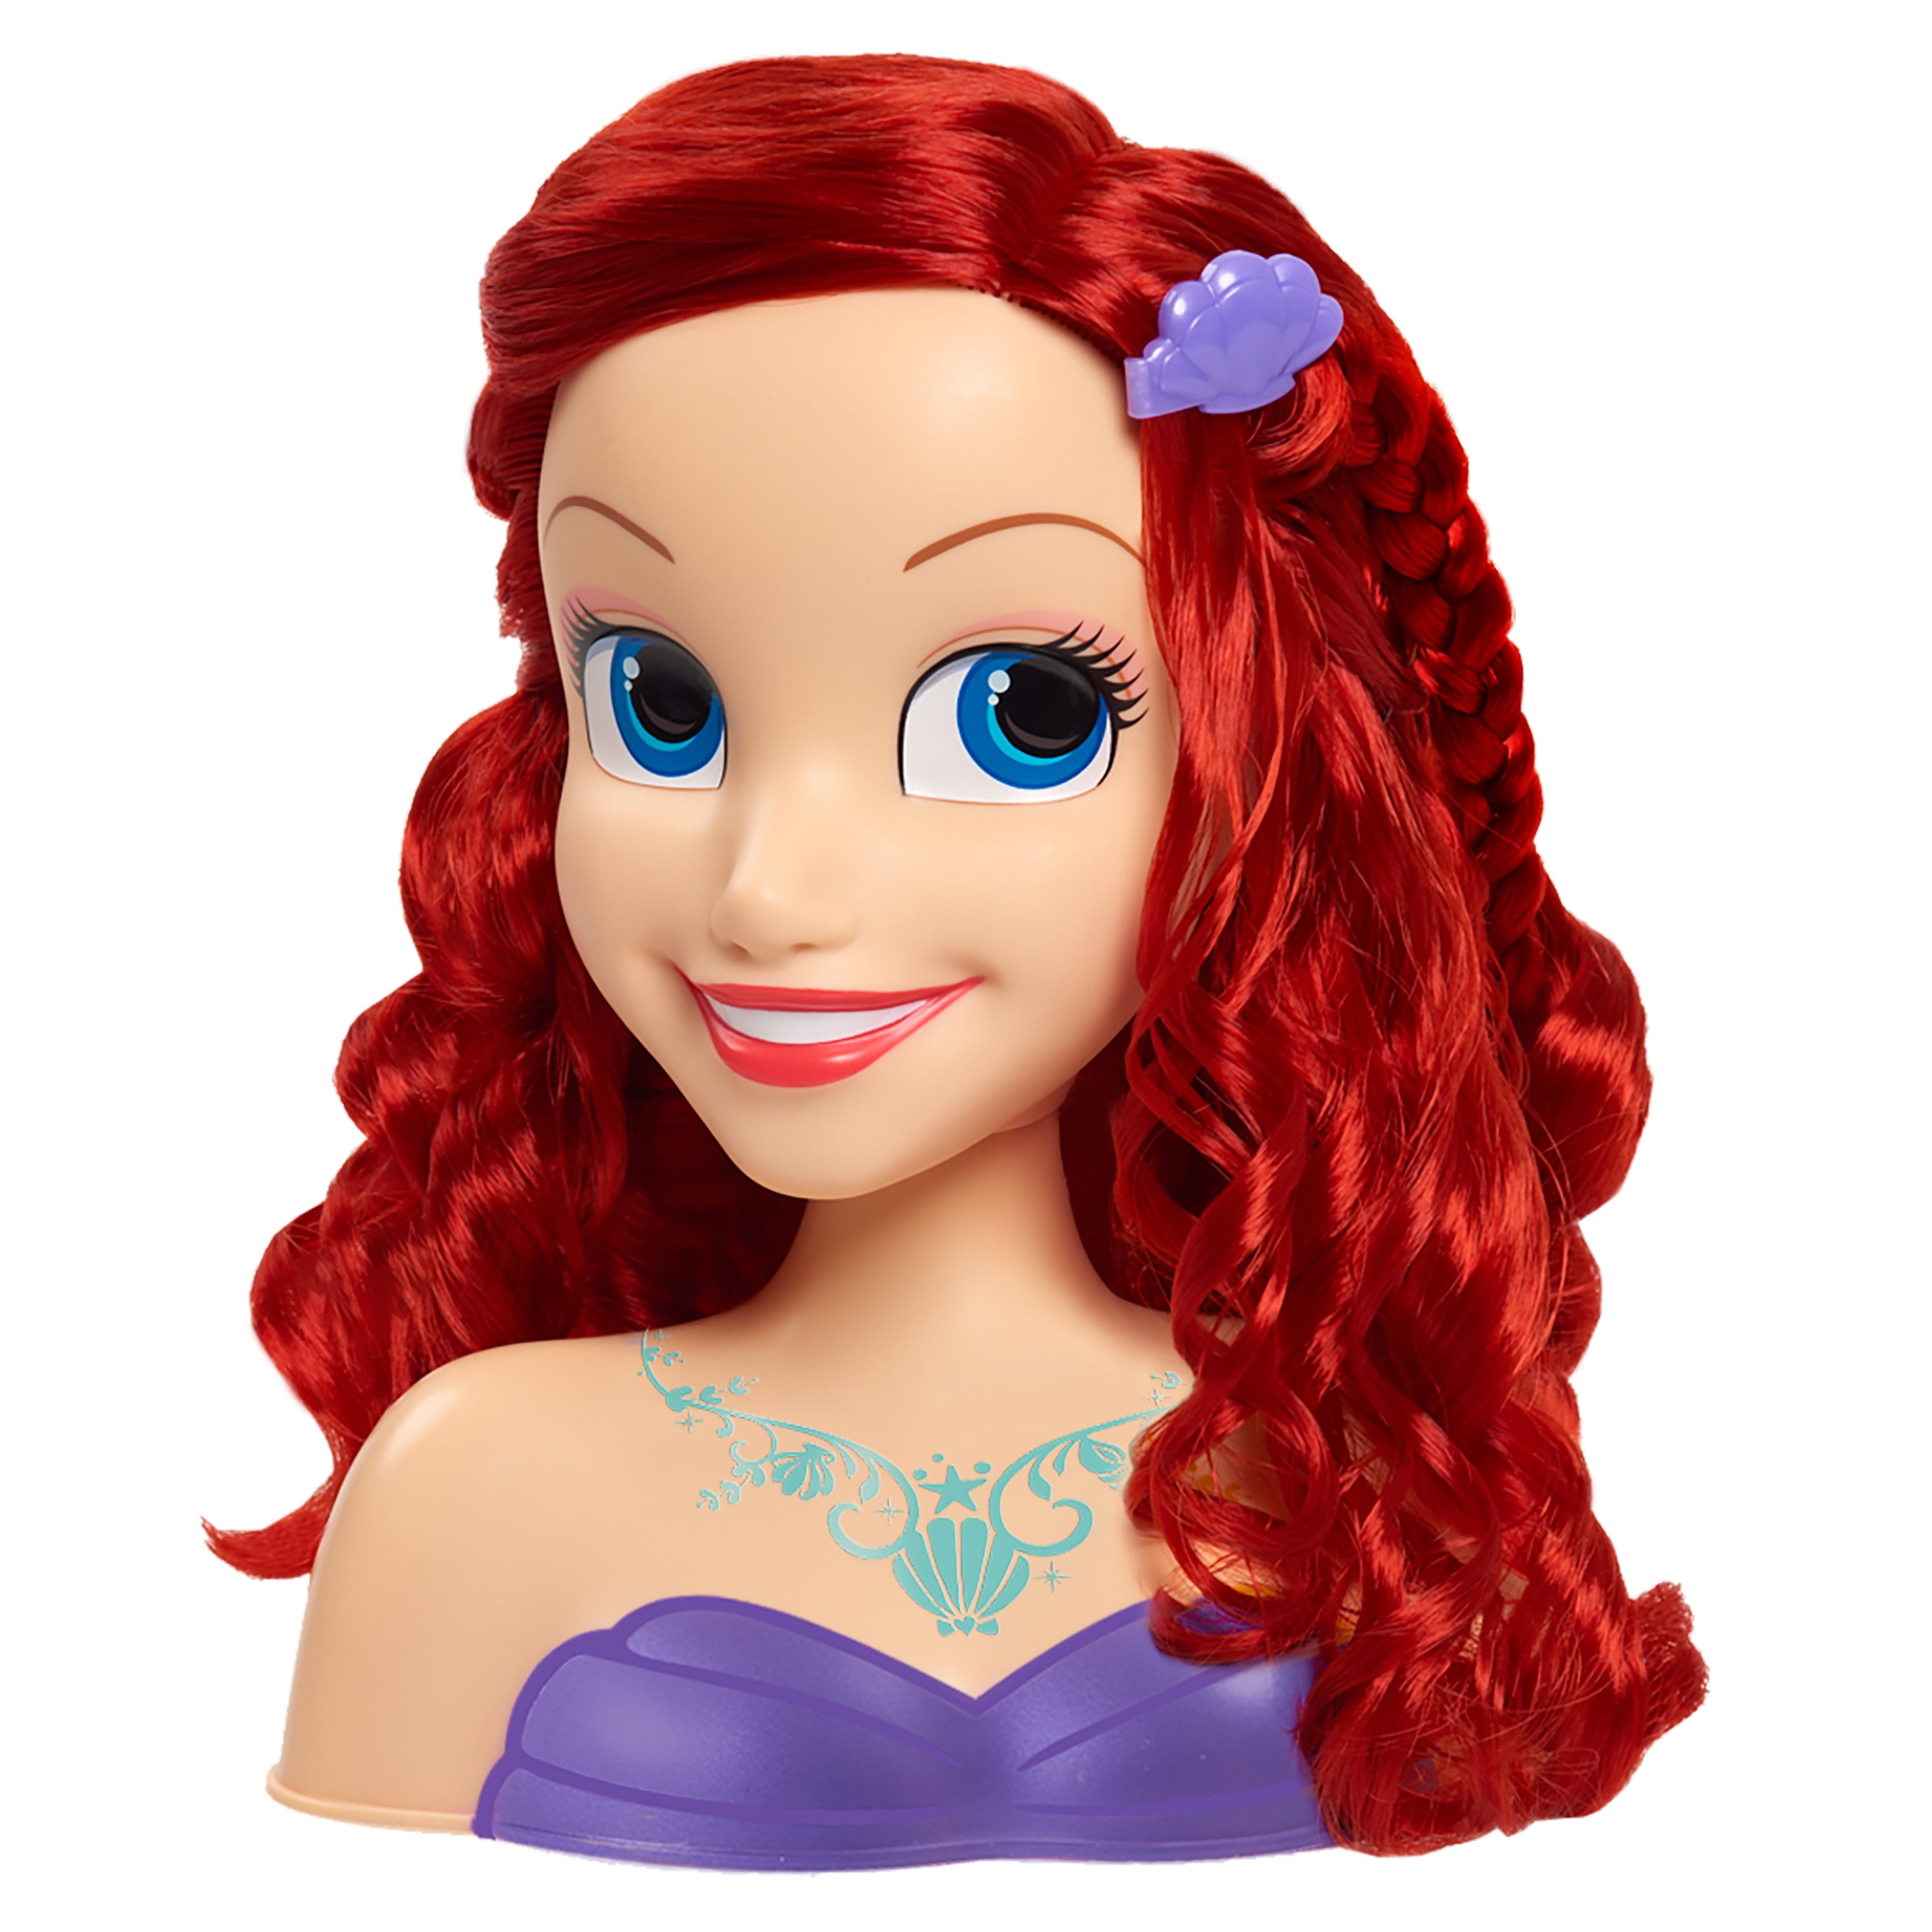 Disney Princess Ariel Styling Head, Red Hair, 10 Piece Pretend Play Set,  The Little Mermaid, Officially Licensed Kids Toys for Ages 3 Up, Gifts and  Presents 